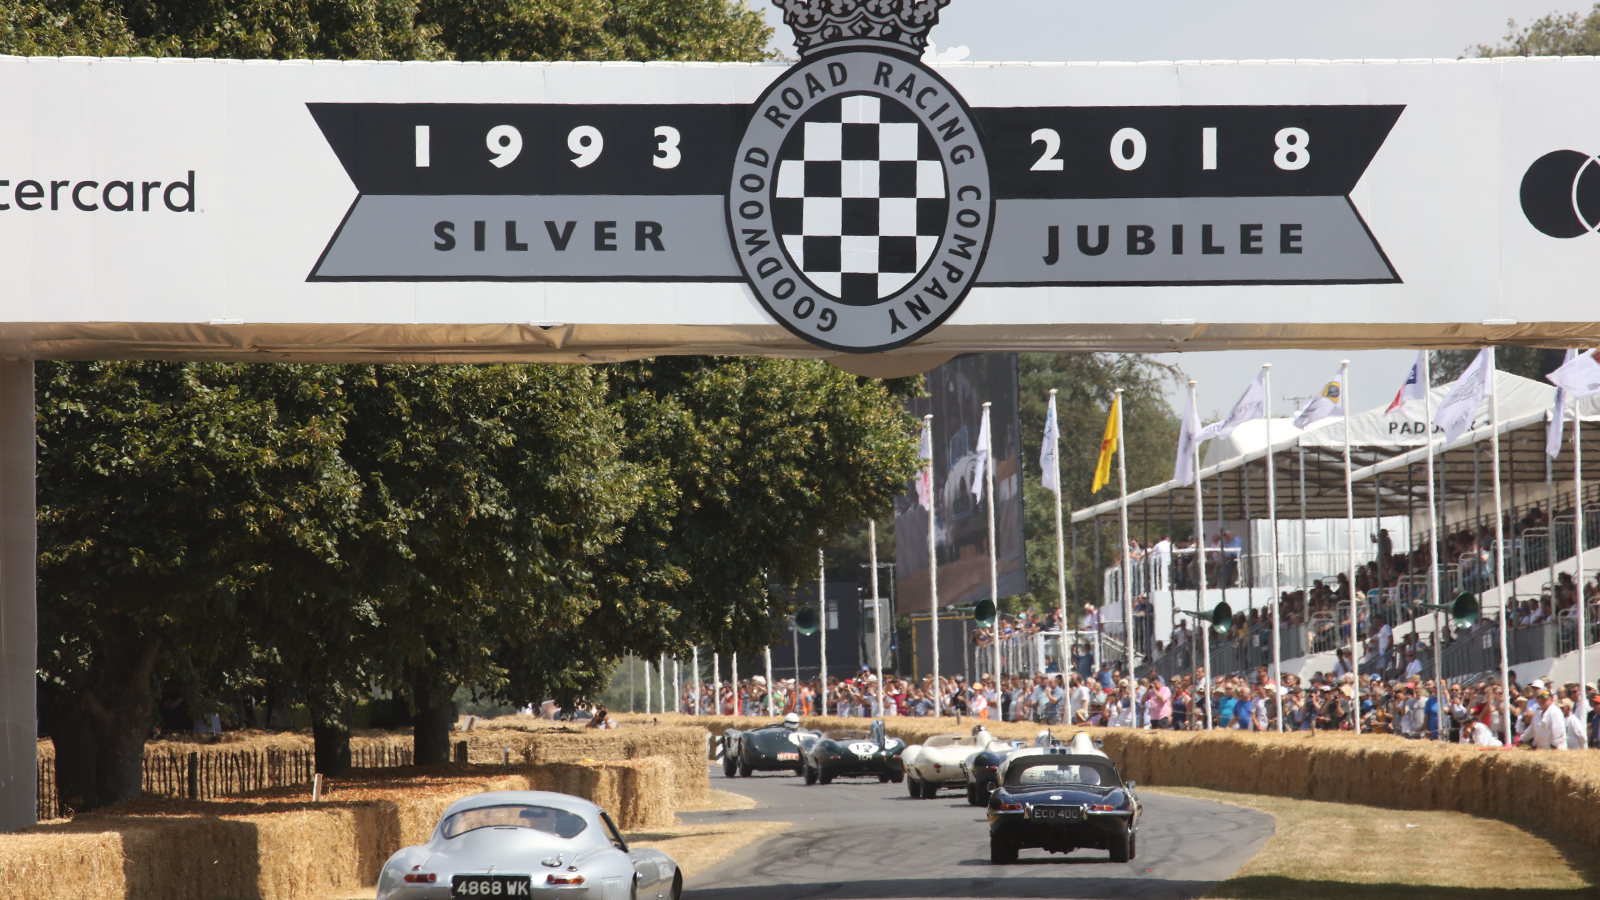 In pictures: Goodwood Festival of Speed 2018